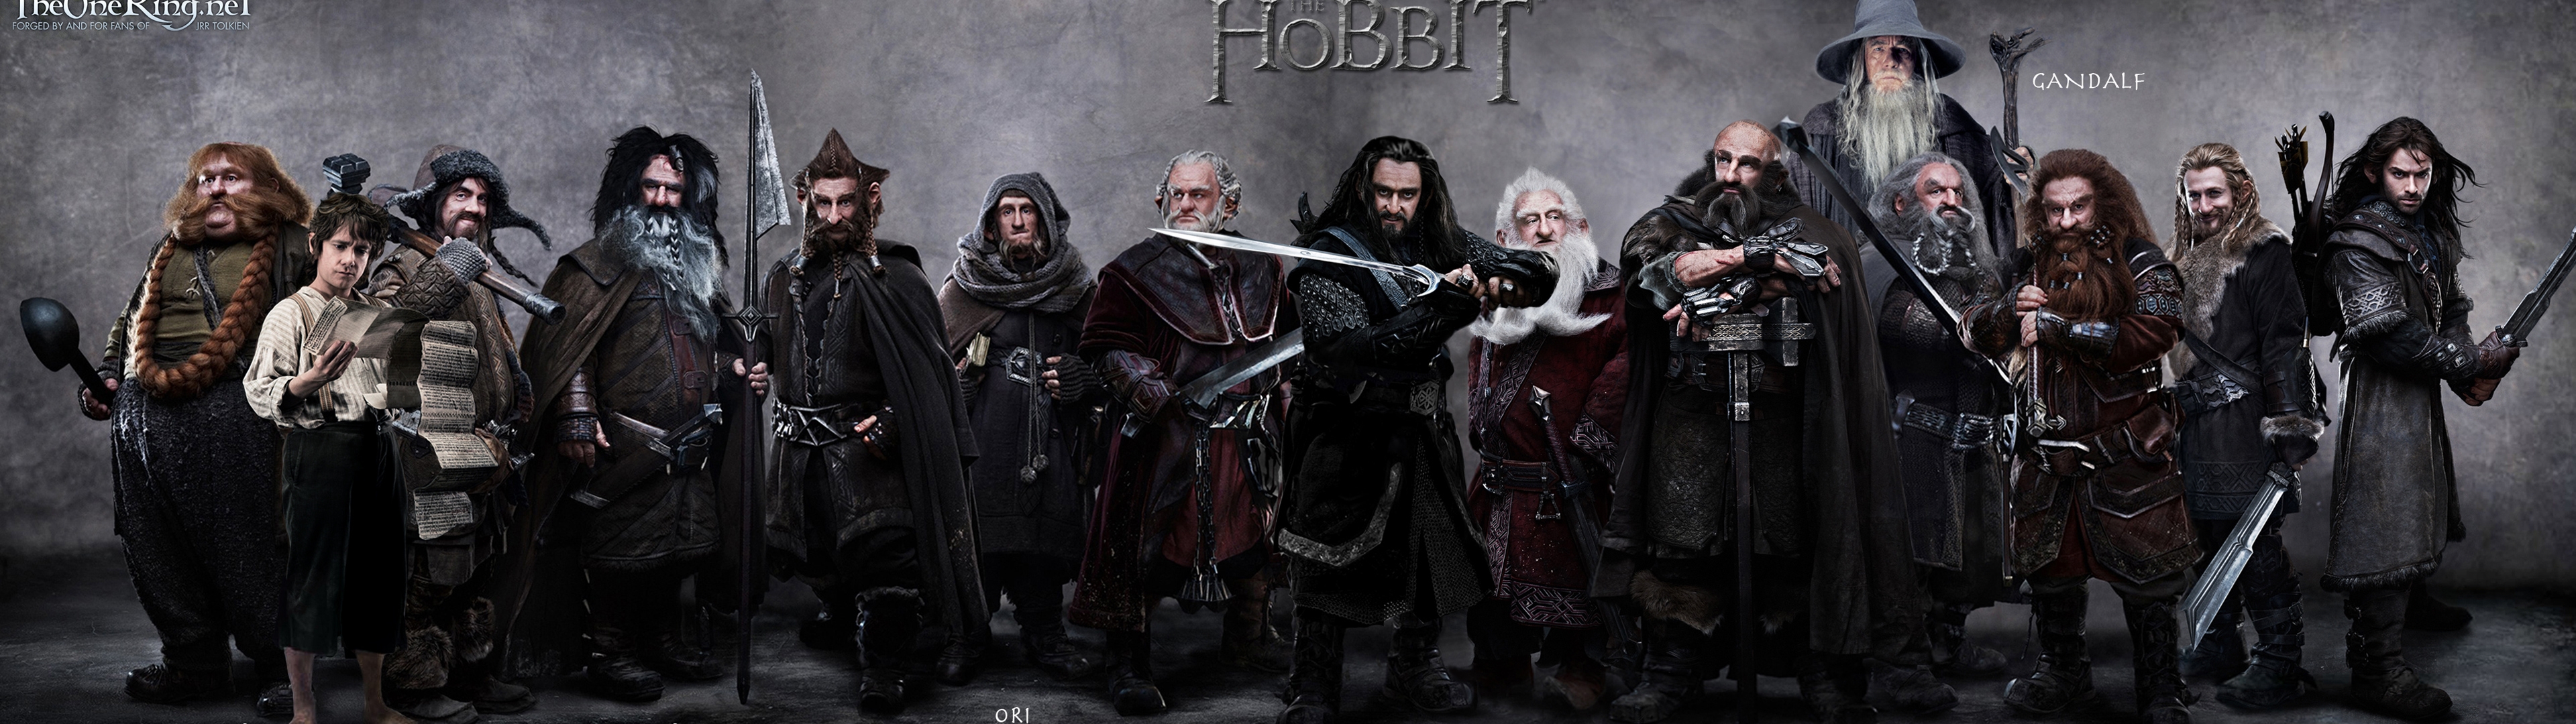 Movie The Hobbit An Unexpected Journey 3840x1080